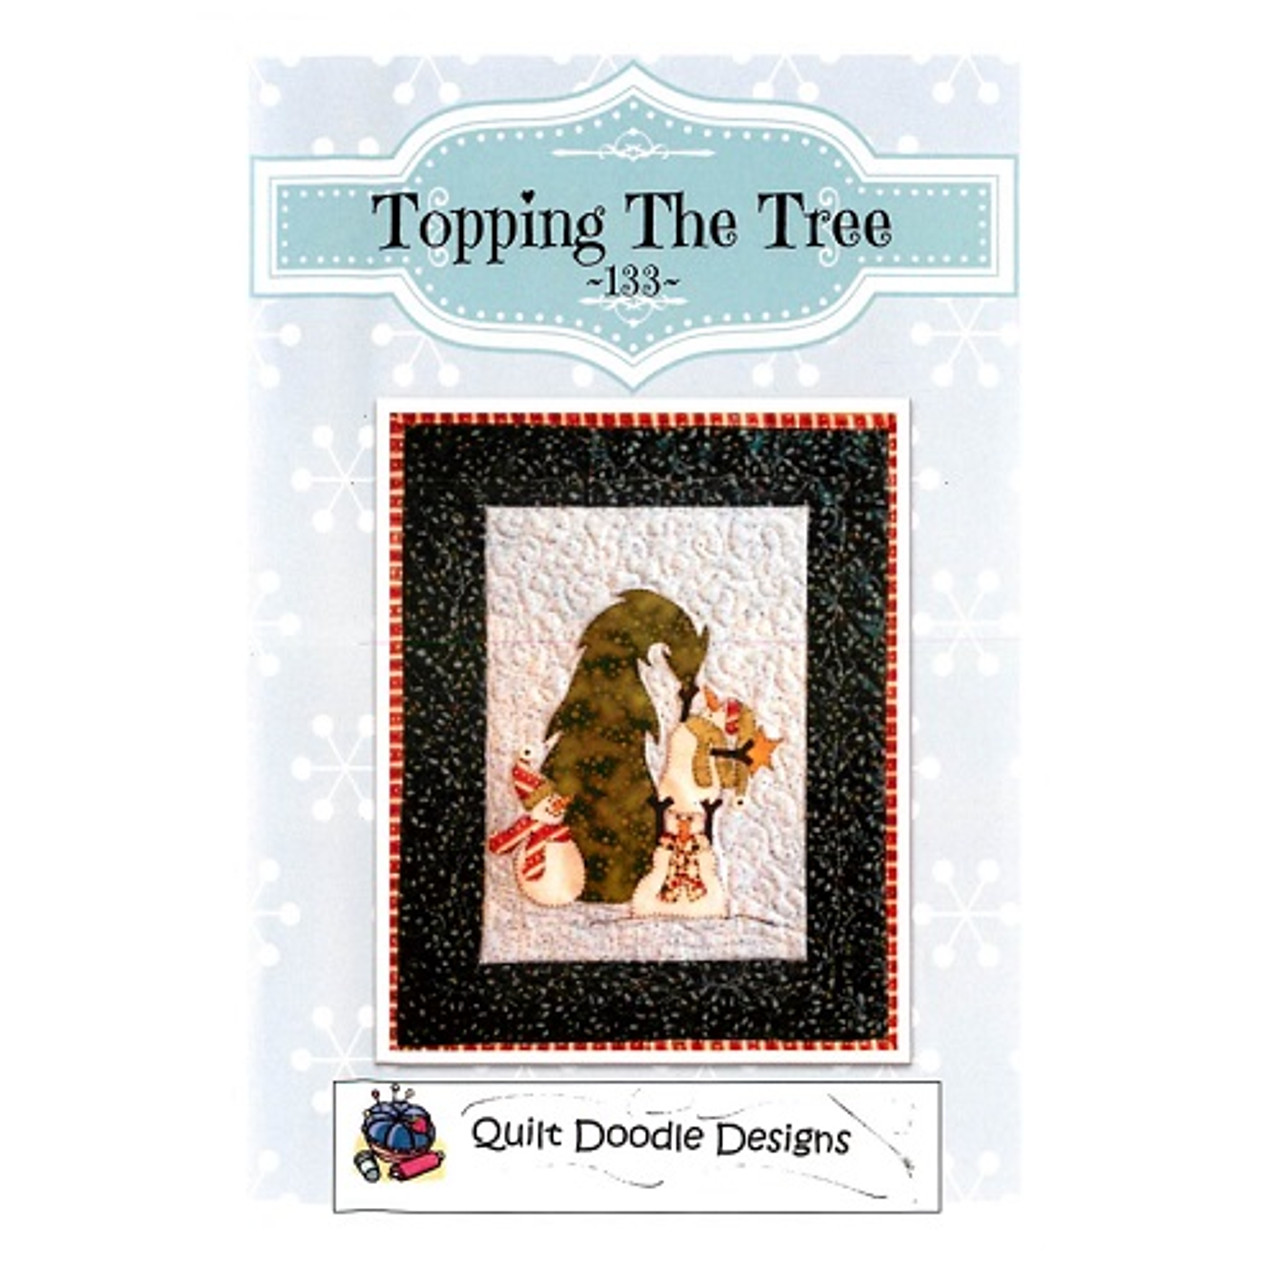 Topping The Tree - Quilt Doodle Designs - Pattern